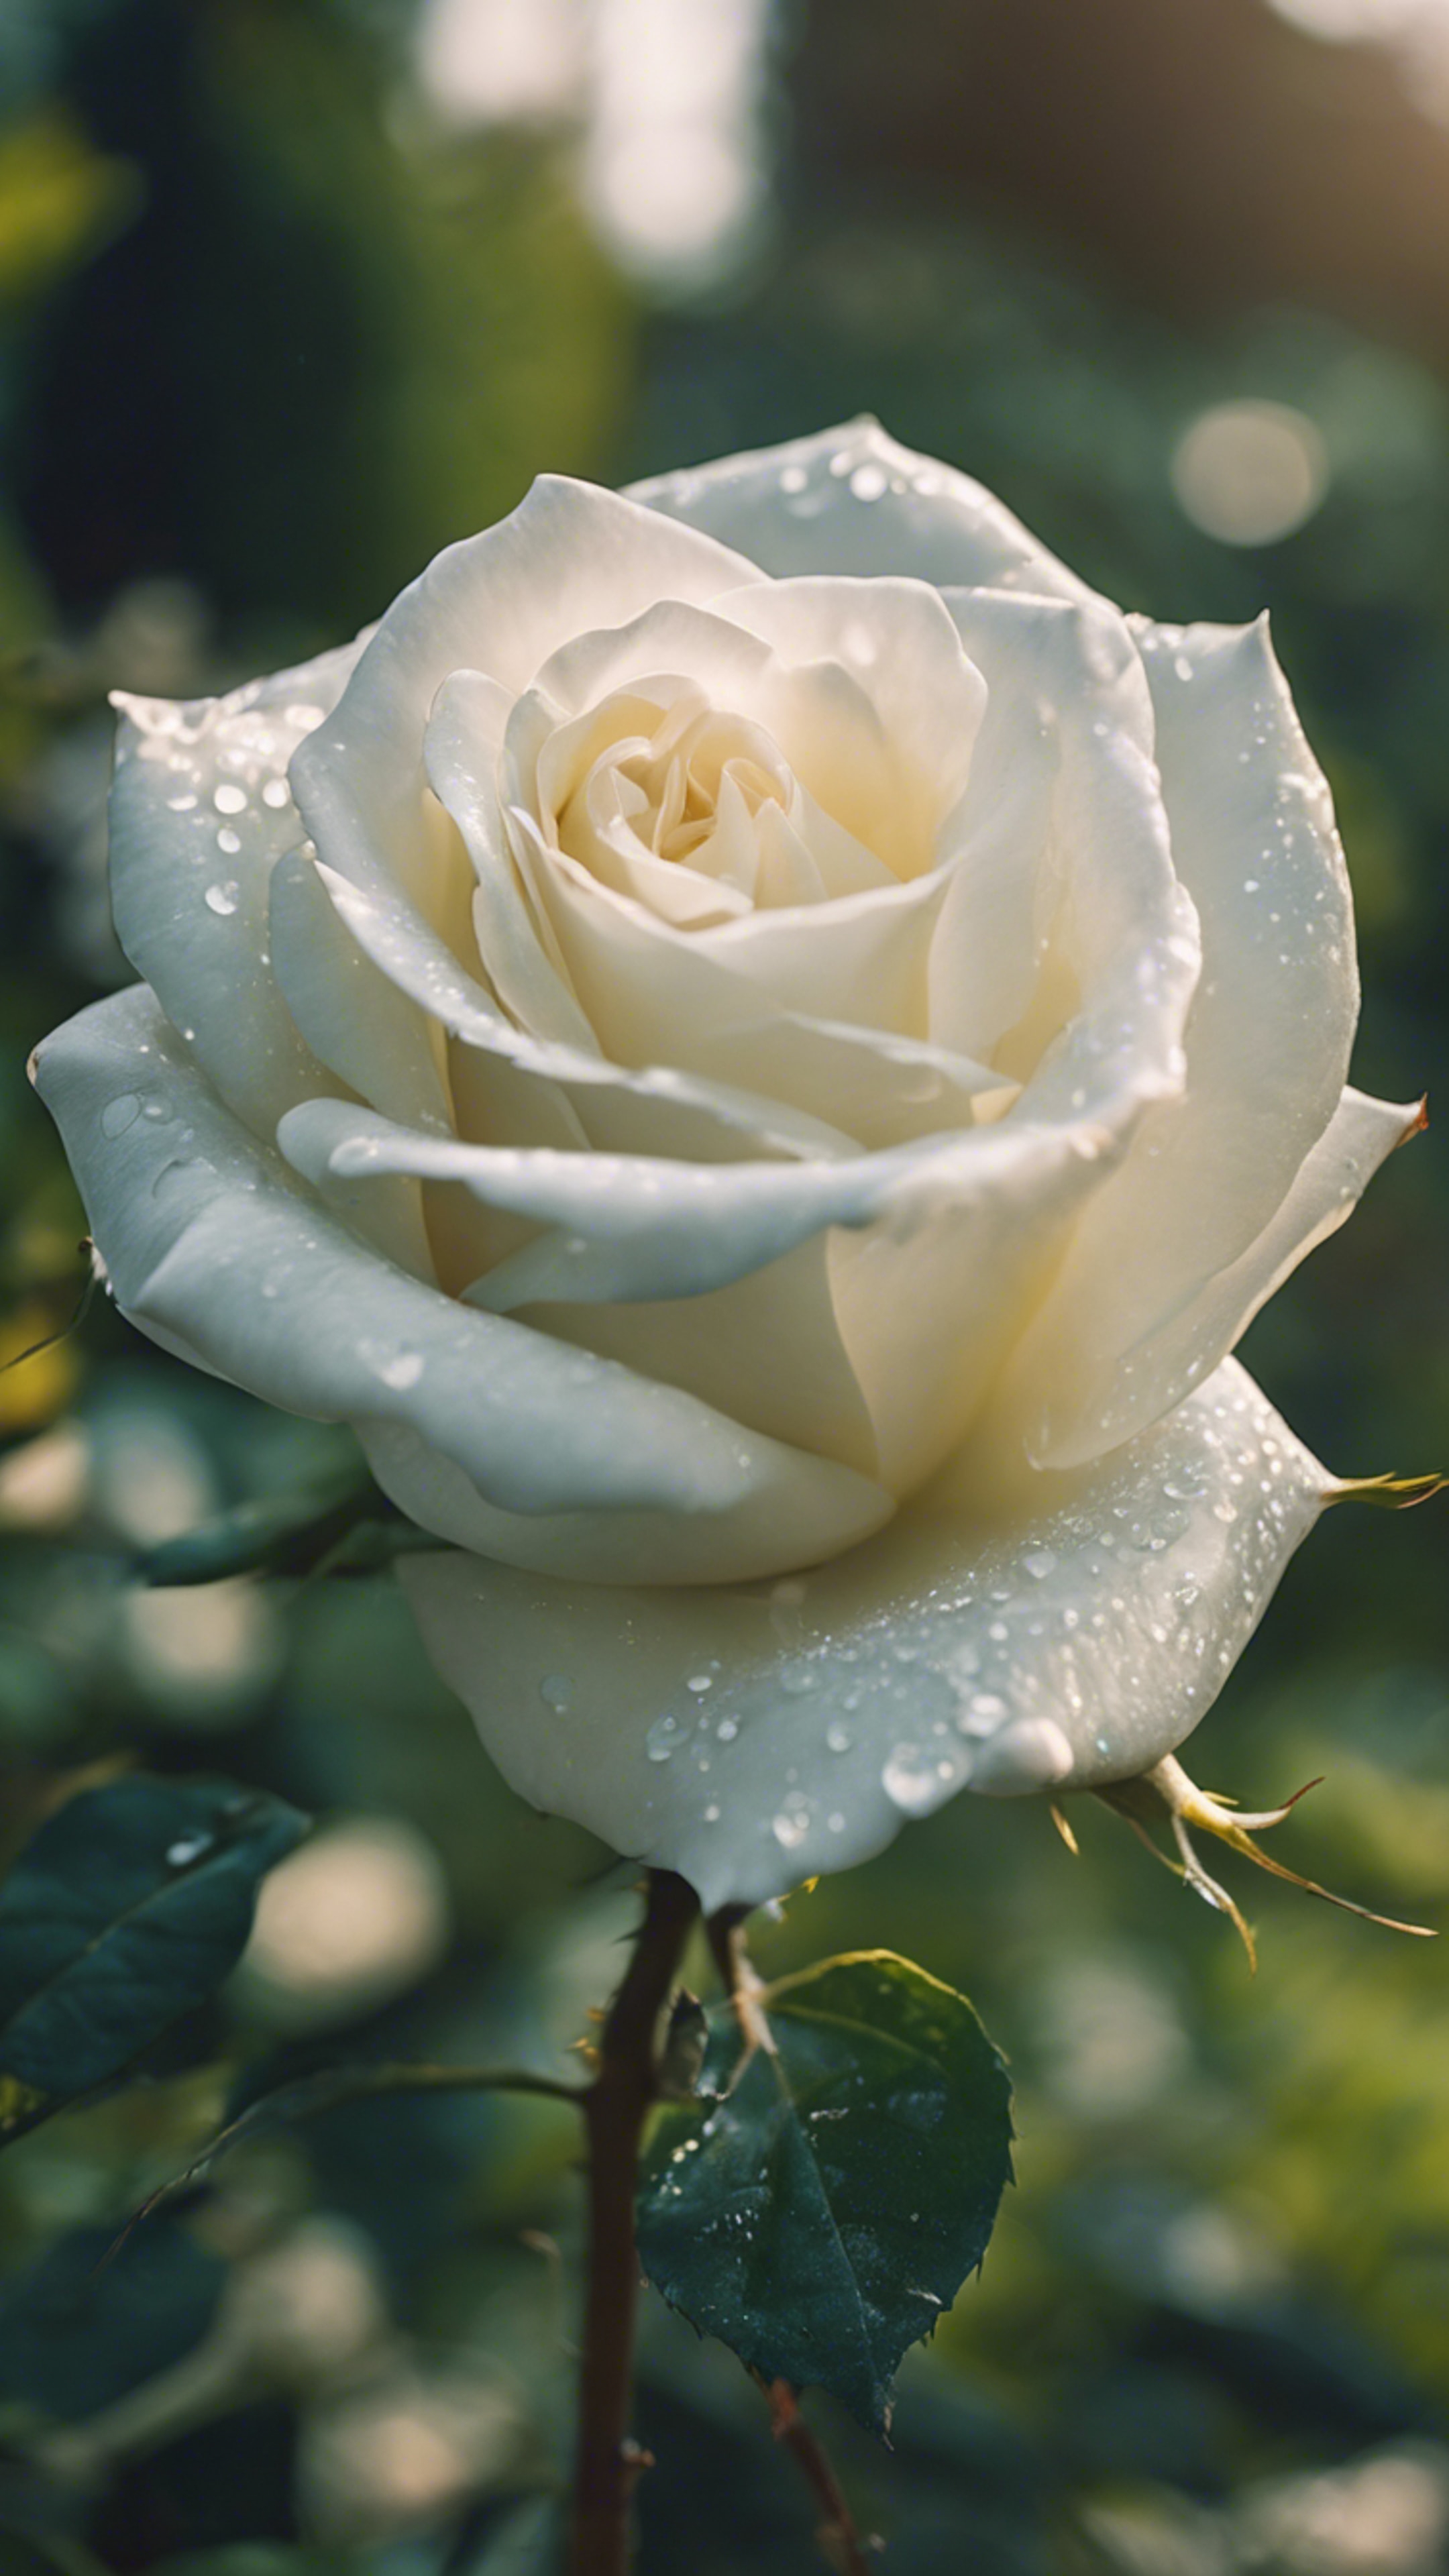 A close-up of a white rose blooming in a lush green garden. Wallpaper[acac1fb1d66c4f76a6fd]